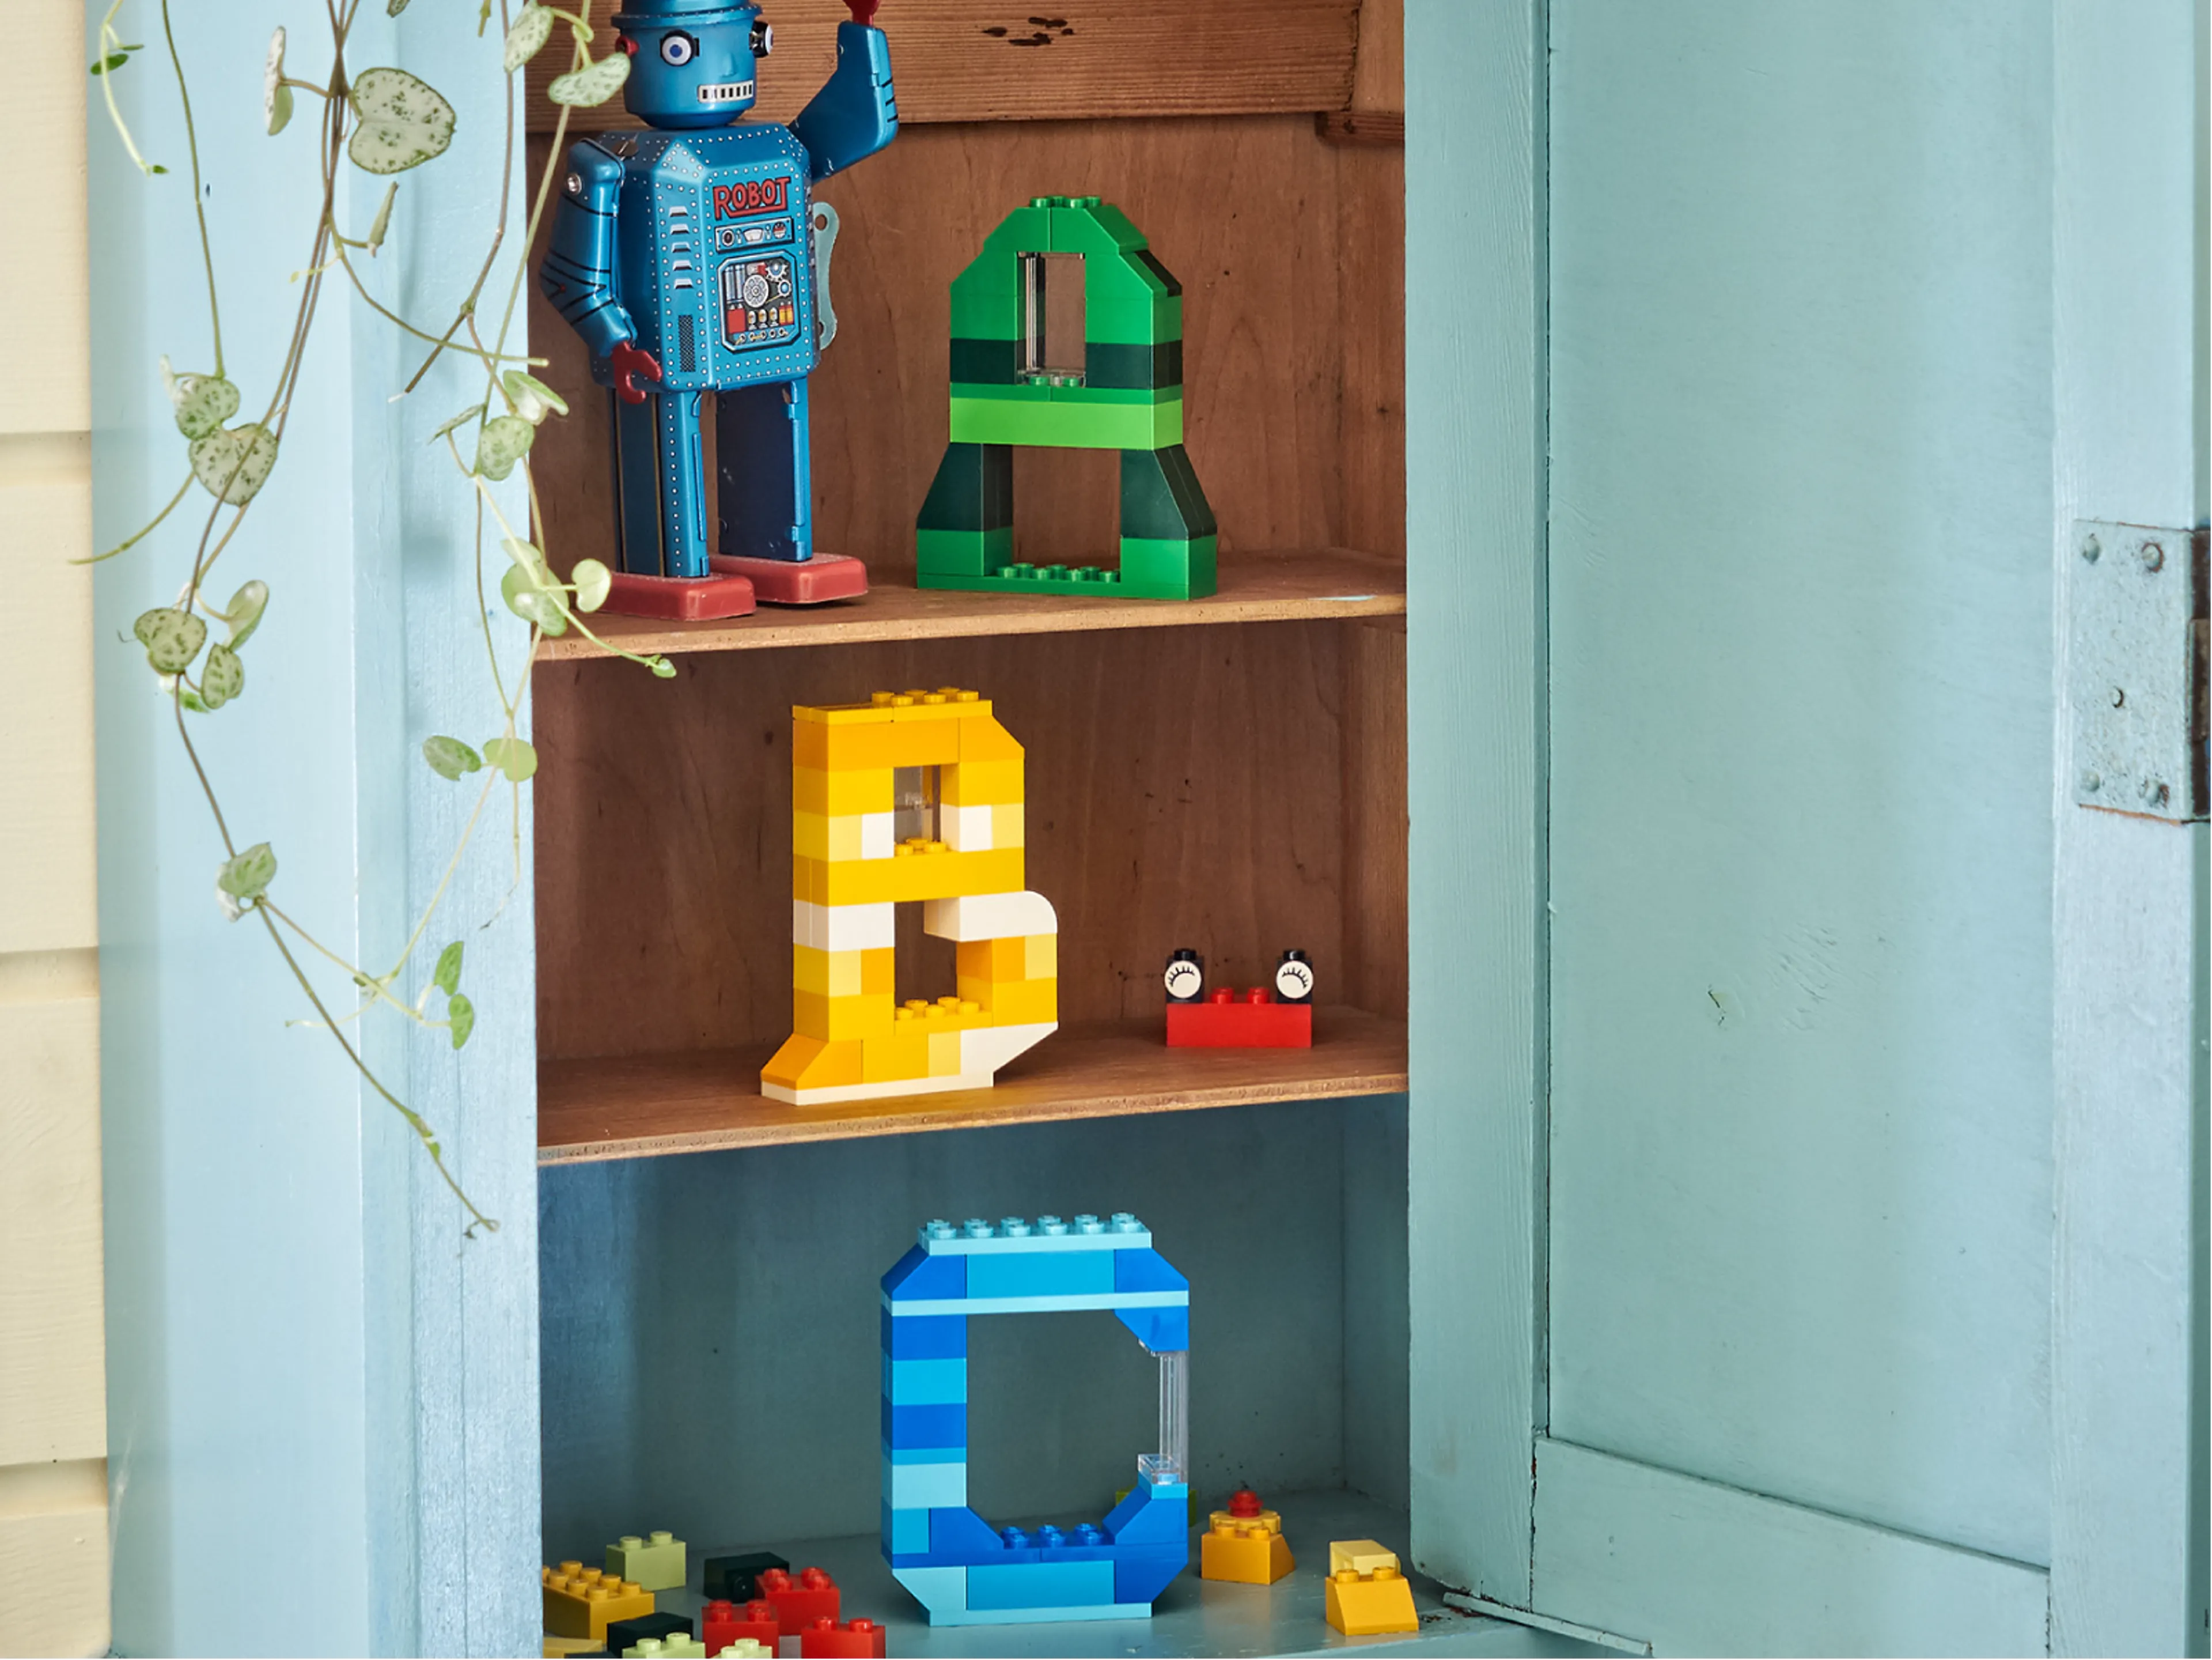 LEGO bricks that form the letters A, B and C